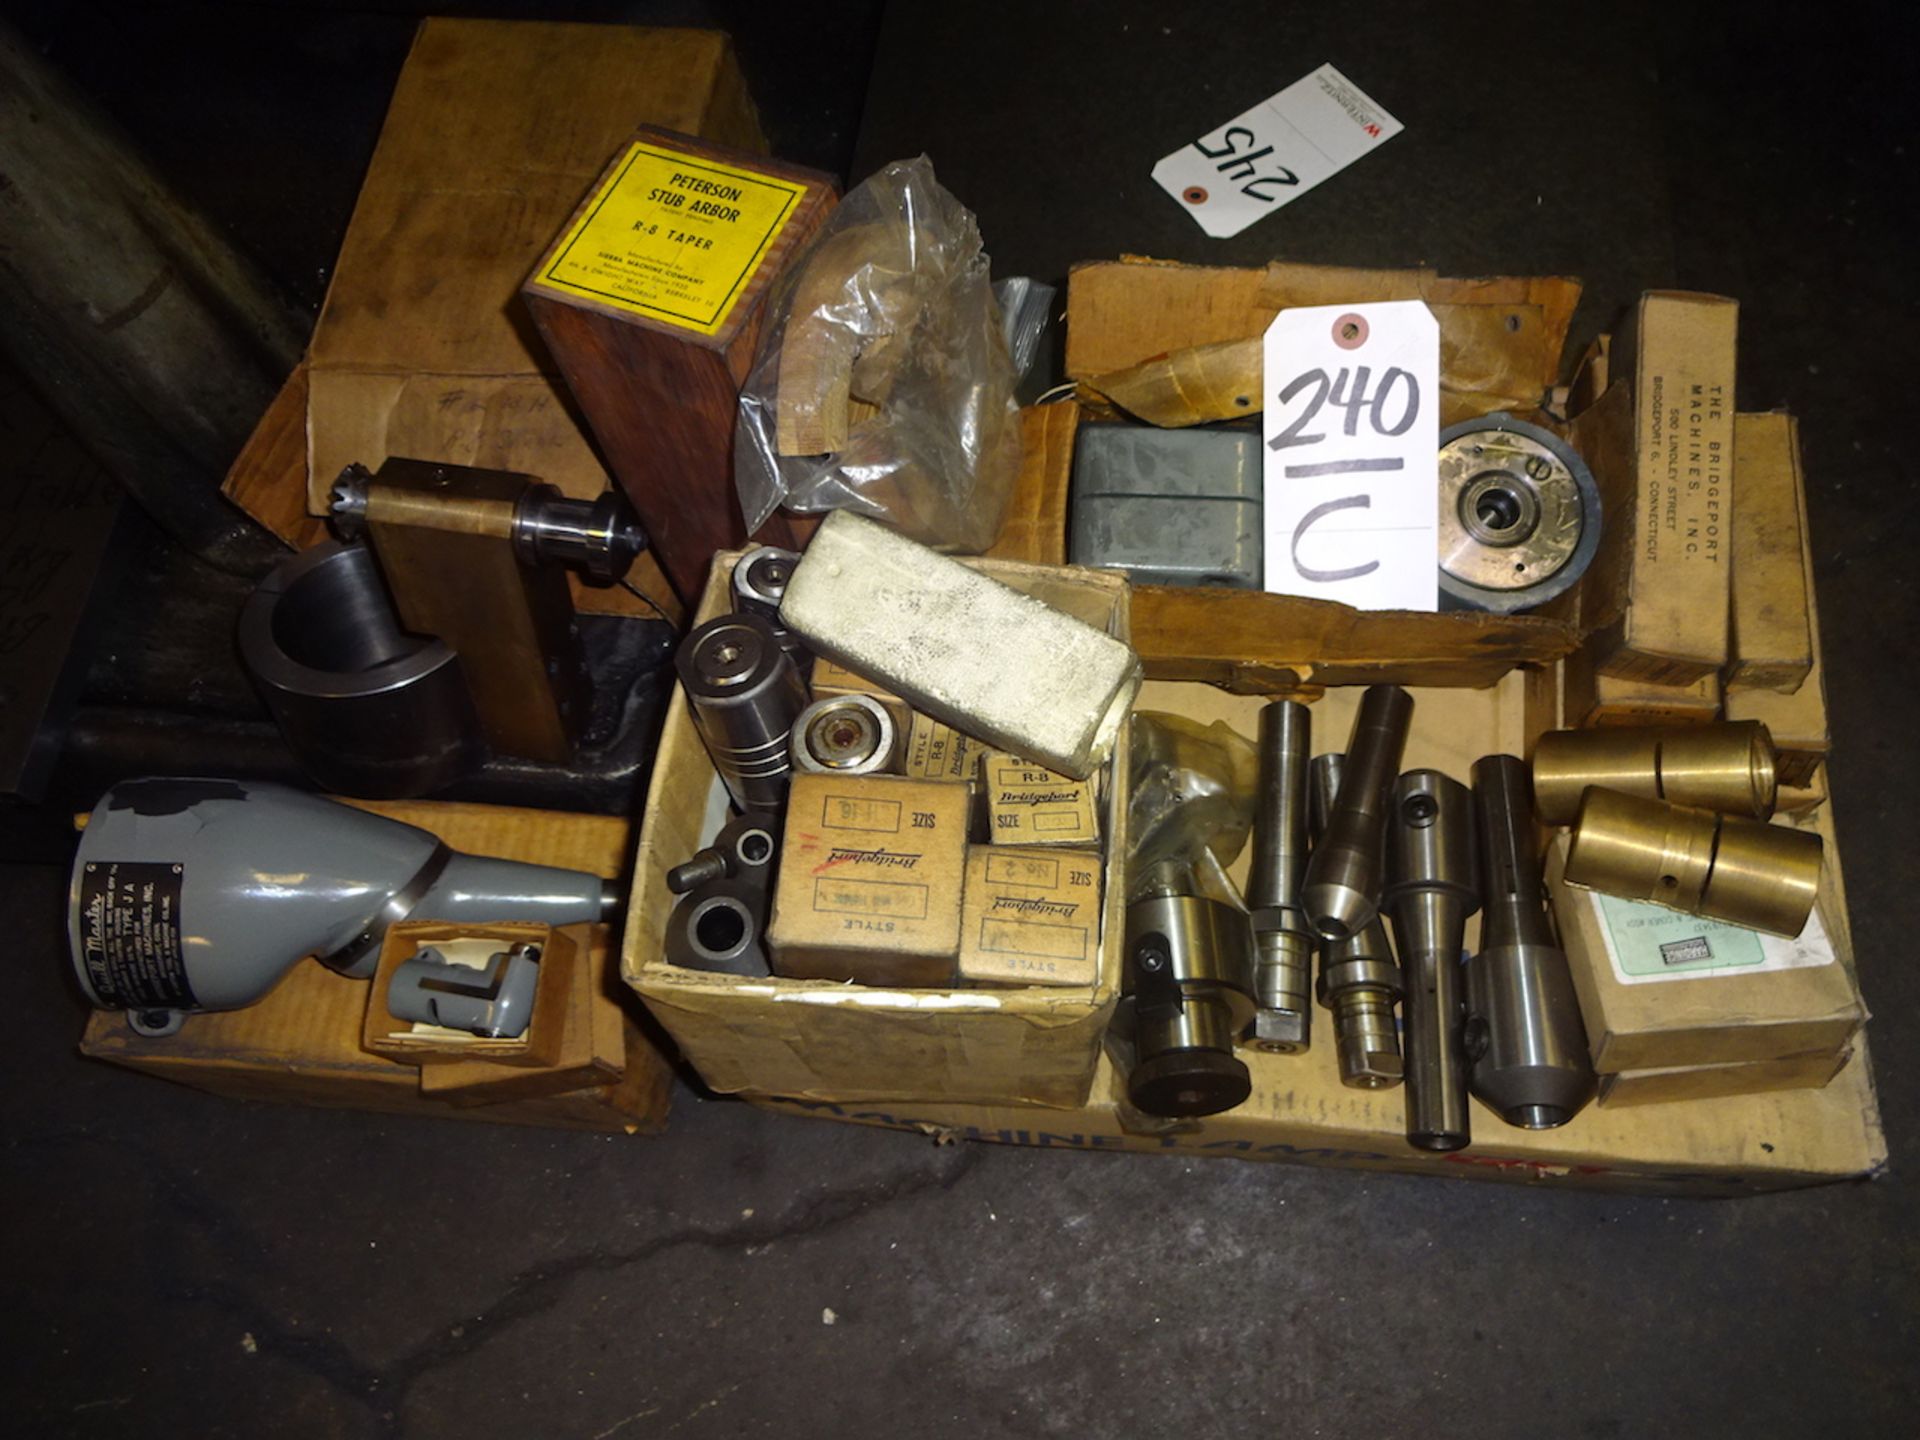 LOT: Bridgeport Accessories including Right Angle Head & Quill Master Head